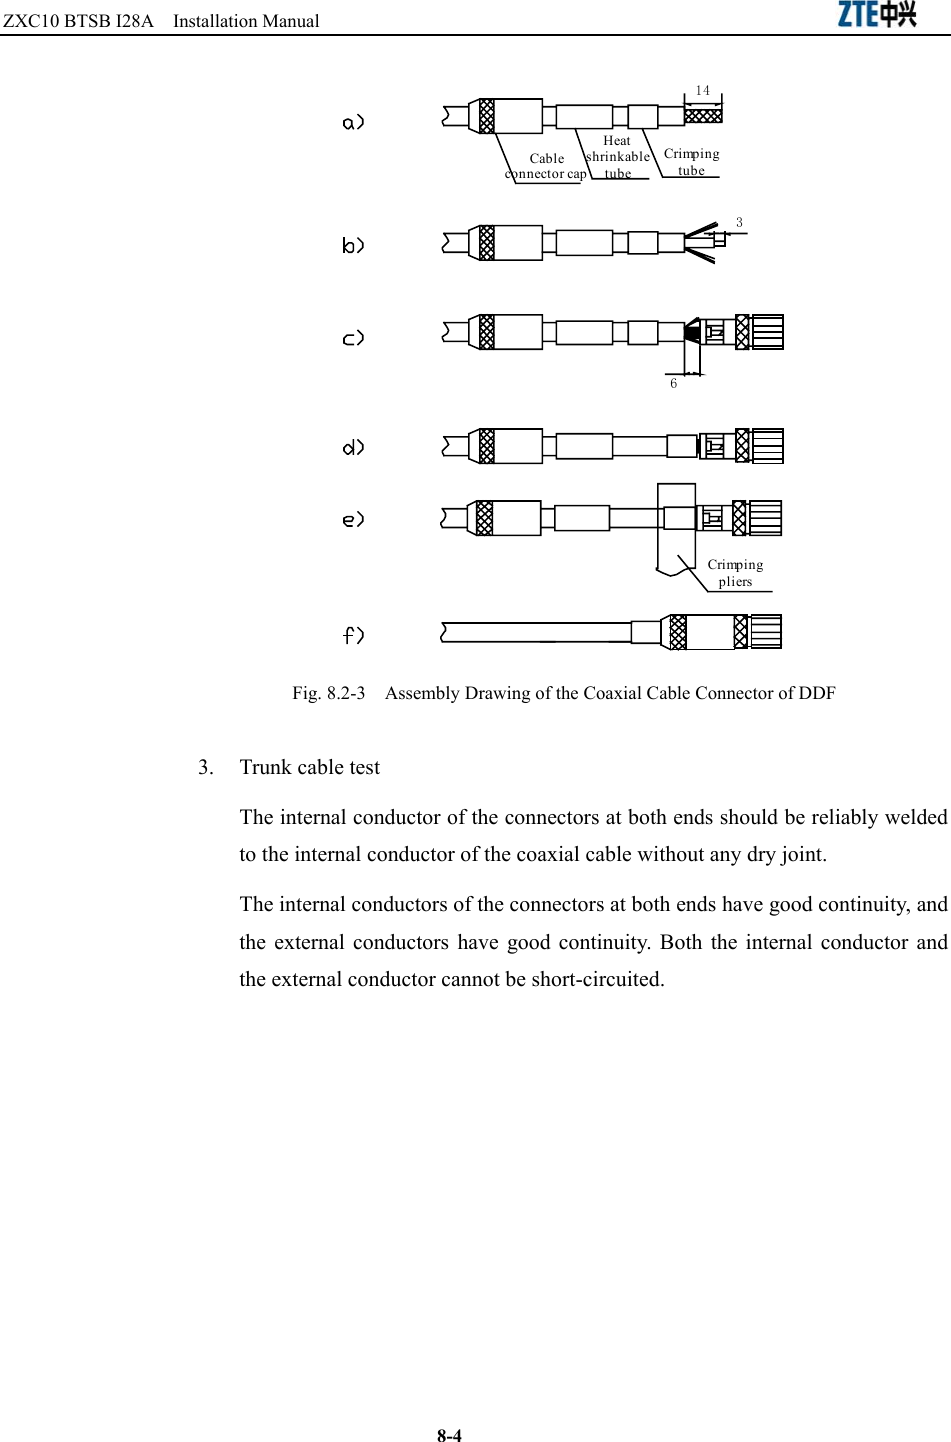 ZXC10 BTSB I28A  Installation Manual                                                          8-4 HeatshrinkabletubeCableconnector capCrimpingpliers1436Crimpingtube Fig. 8.2-3    Assembly Drawing of the Coaxial Cable Connector of DDF 3.  Trunk cable test The internal conductor of the connectors at both ends should be reliably welded to the internal conductor of the coaxial cable without any dry joint.   The internal conductors of the connectors at both ends have good continuity, and the external conductors have good continuity. Both the internal conductor and the external conductor cannot be short-circuited.   